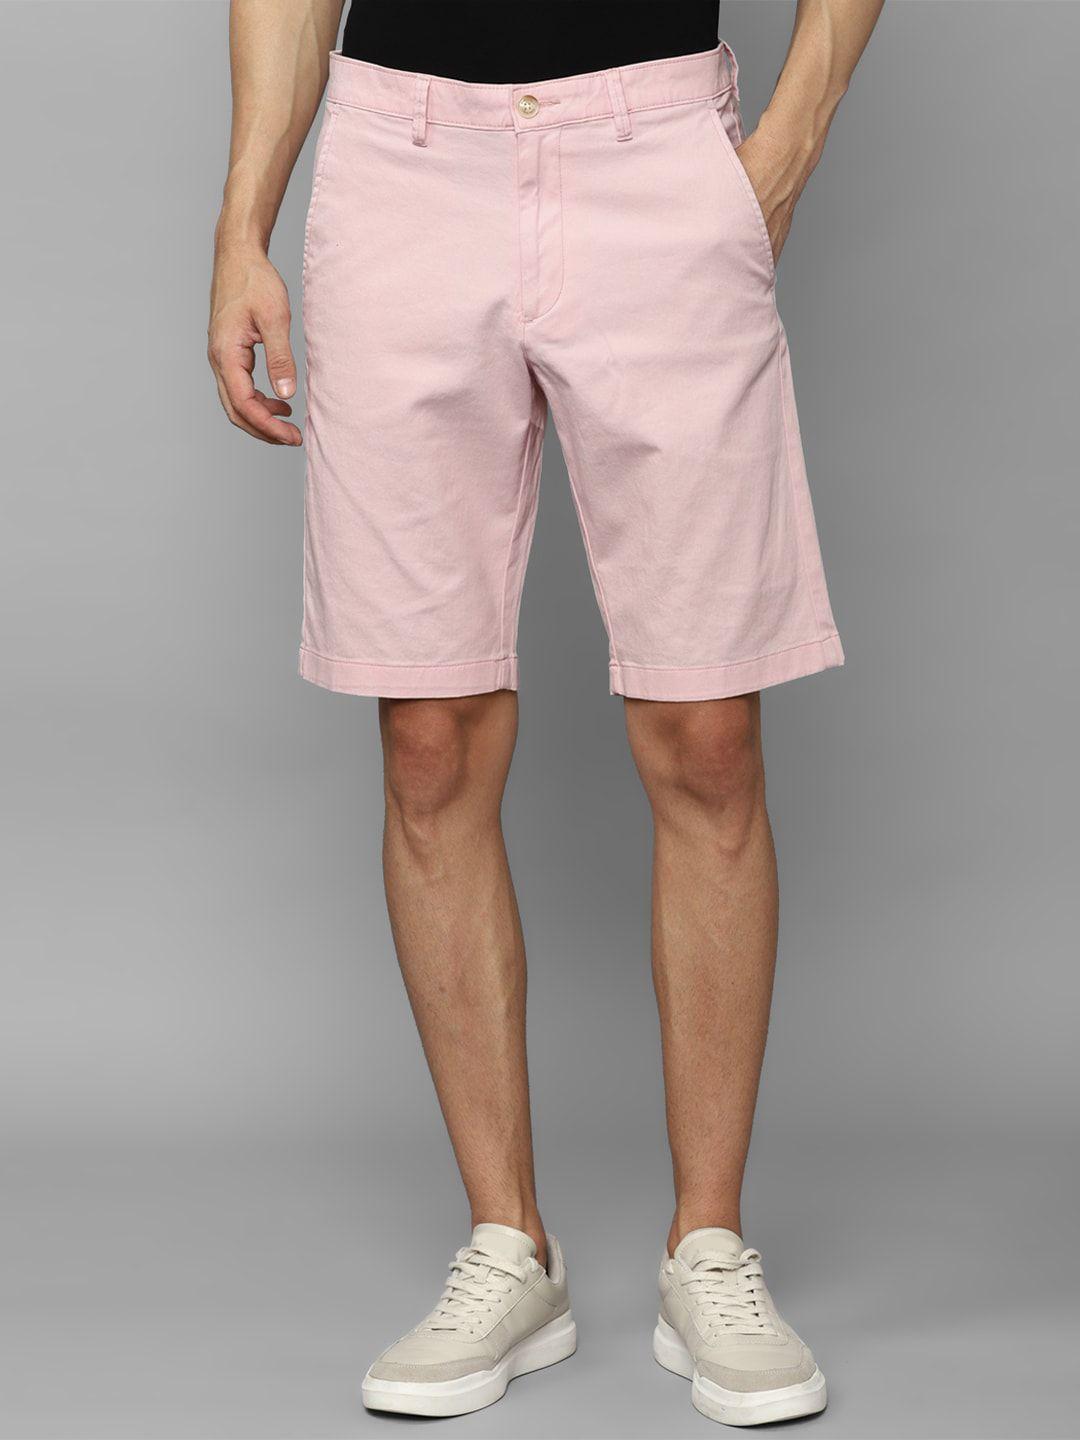 allen solly men slim fit mid-rise chino shorts